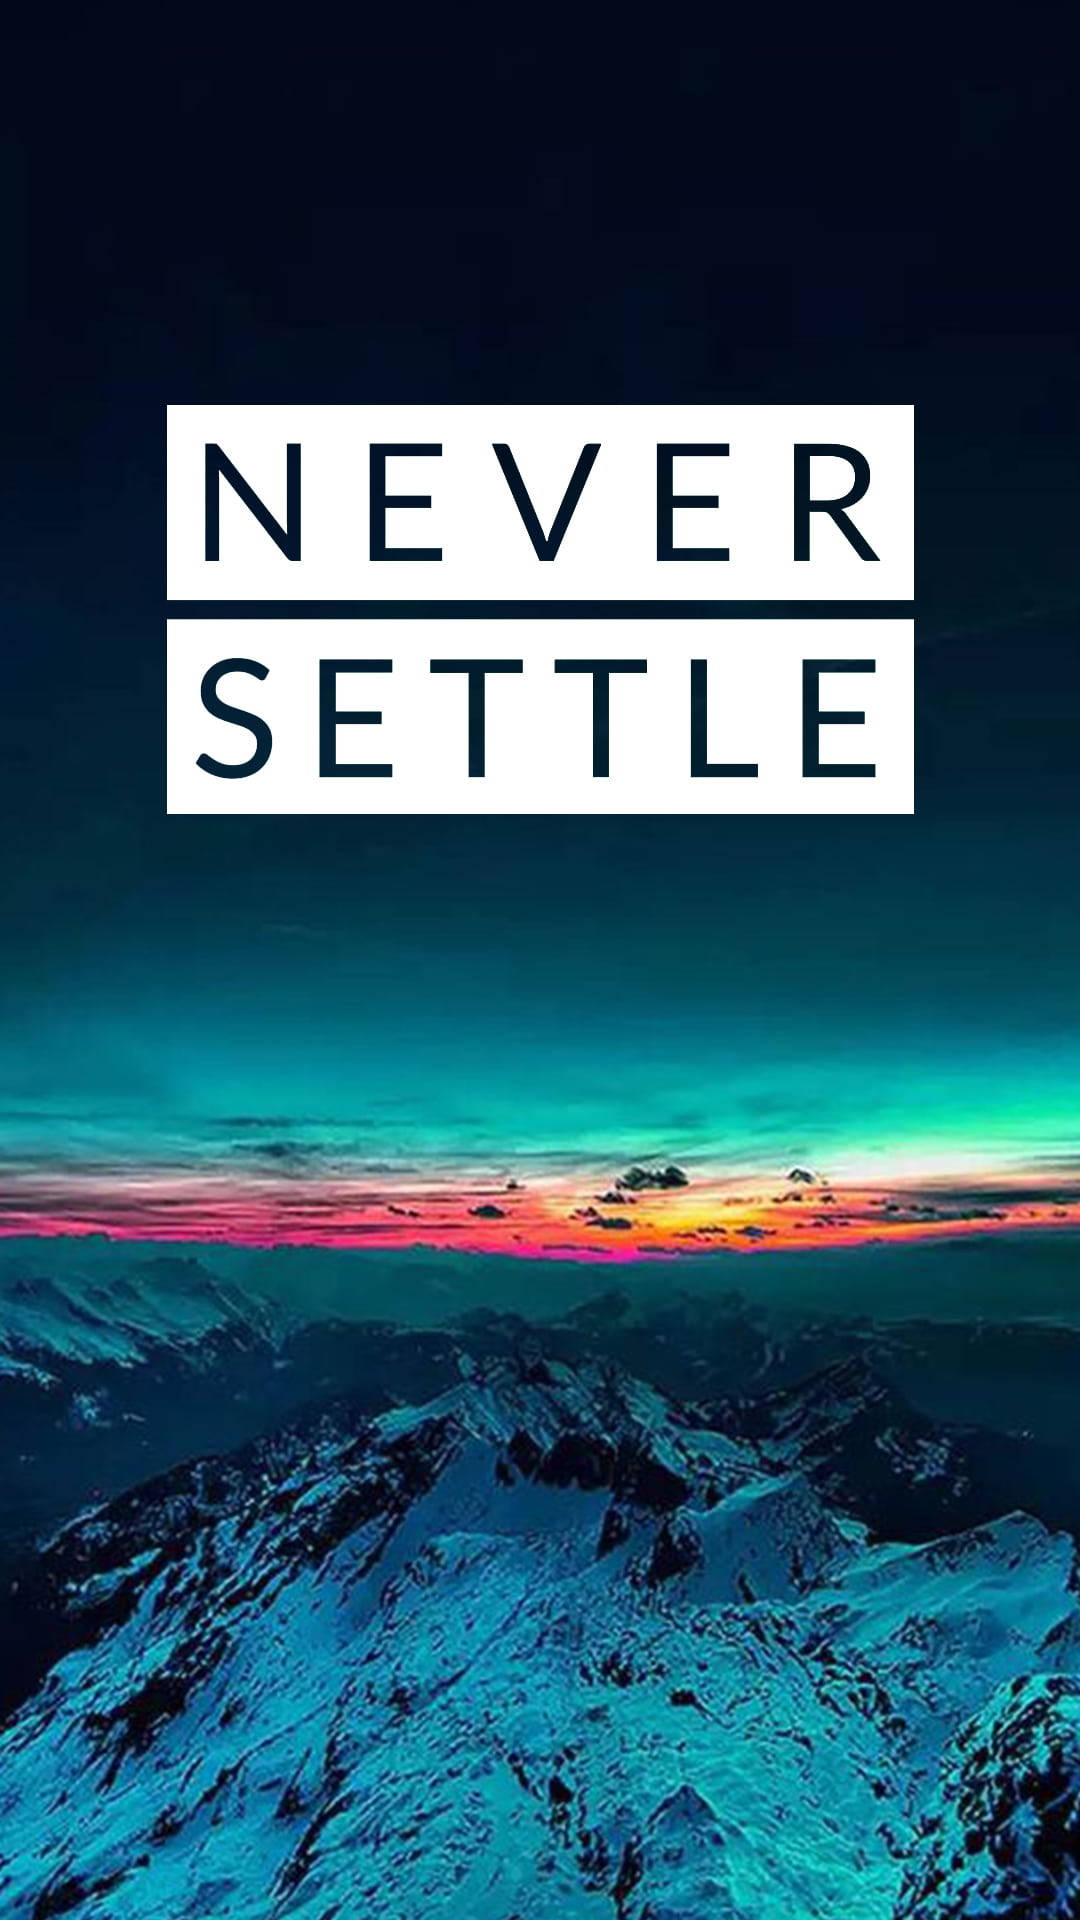 Oneplus Nord Never Setter Mountain View Wallpaper